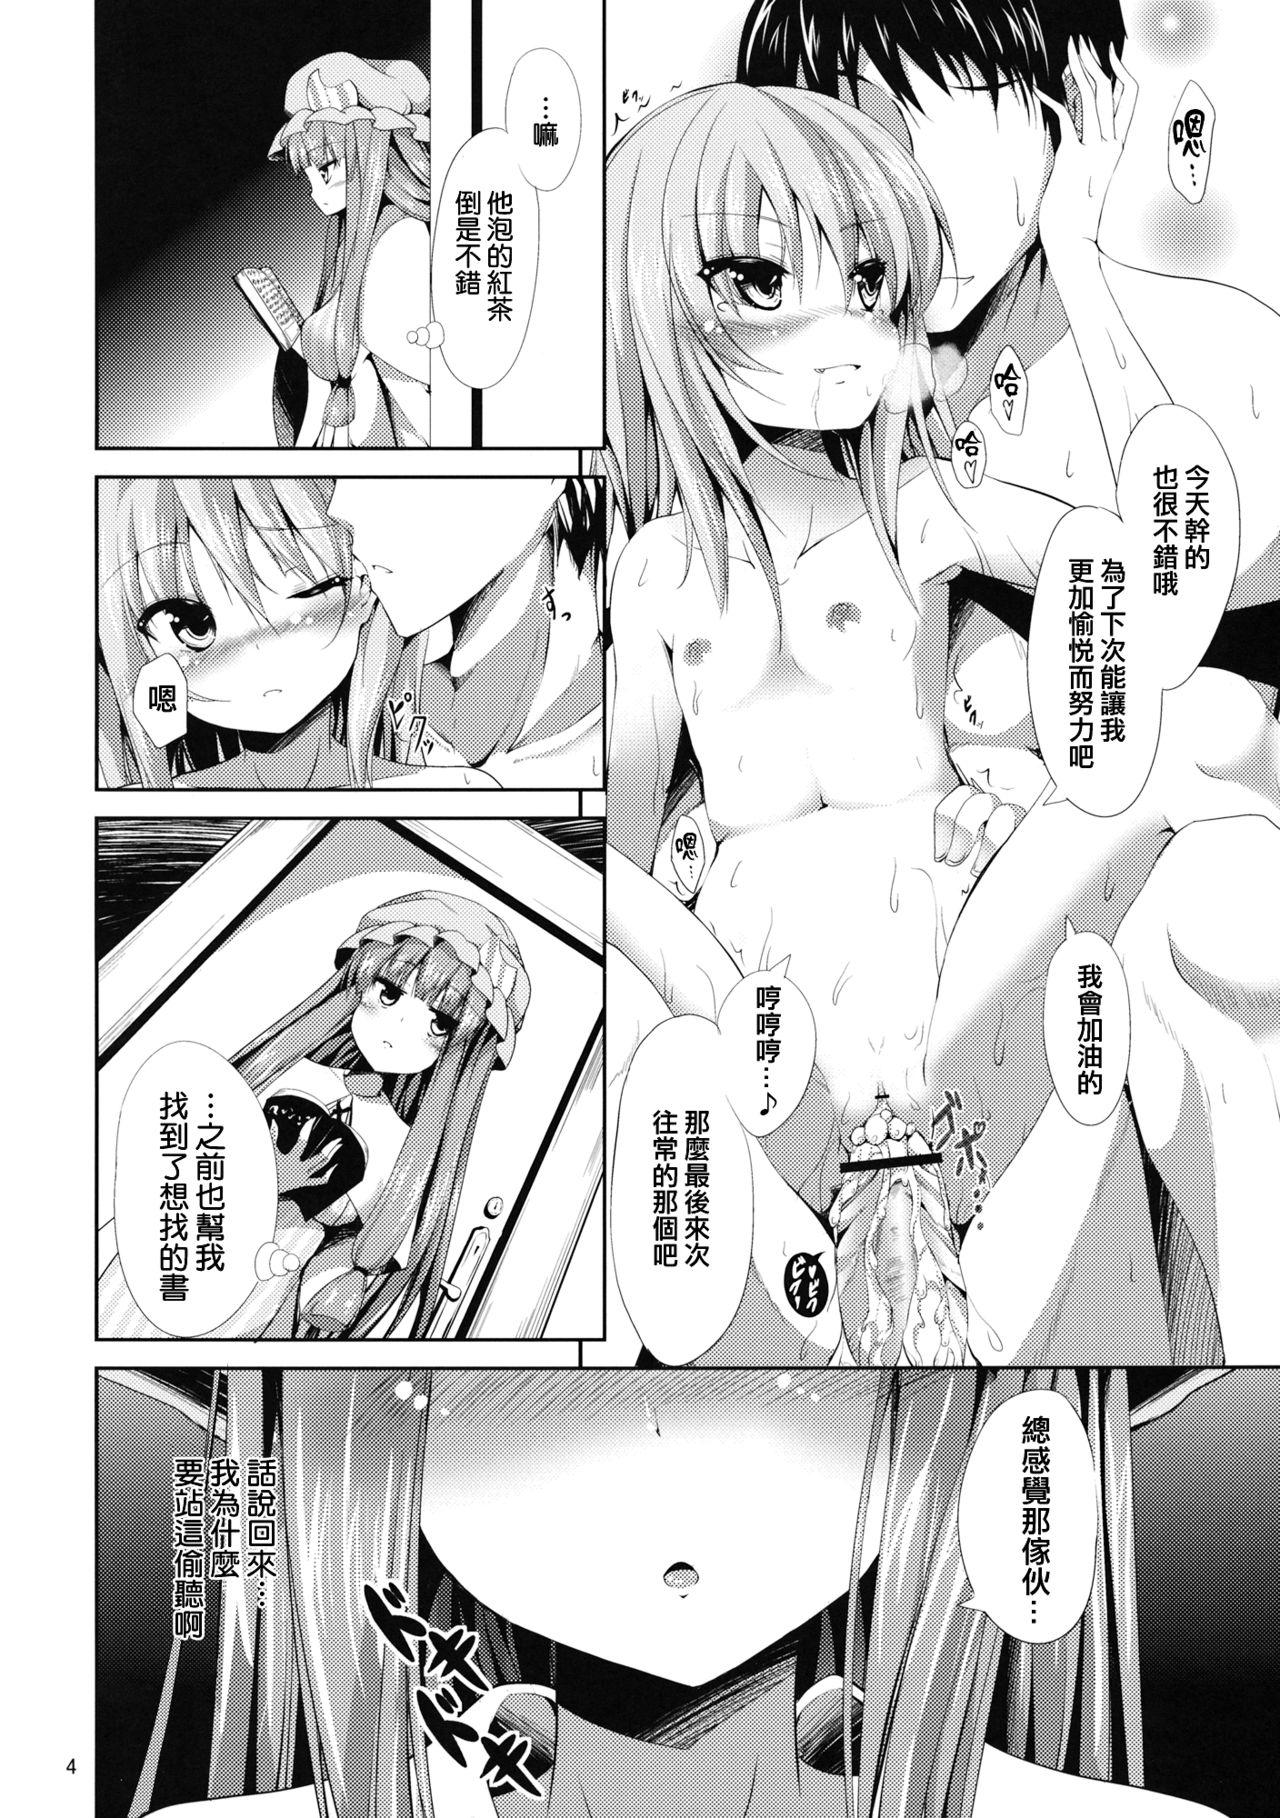 Pussy Fingering Sweet nothingS - Touhou project Pov Sex - Page 4